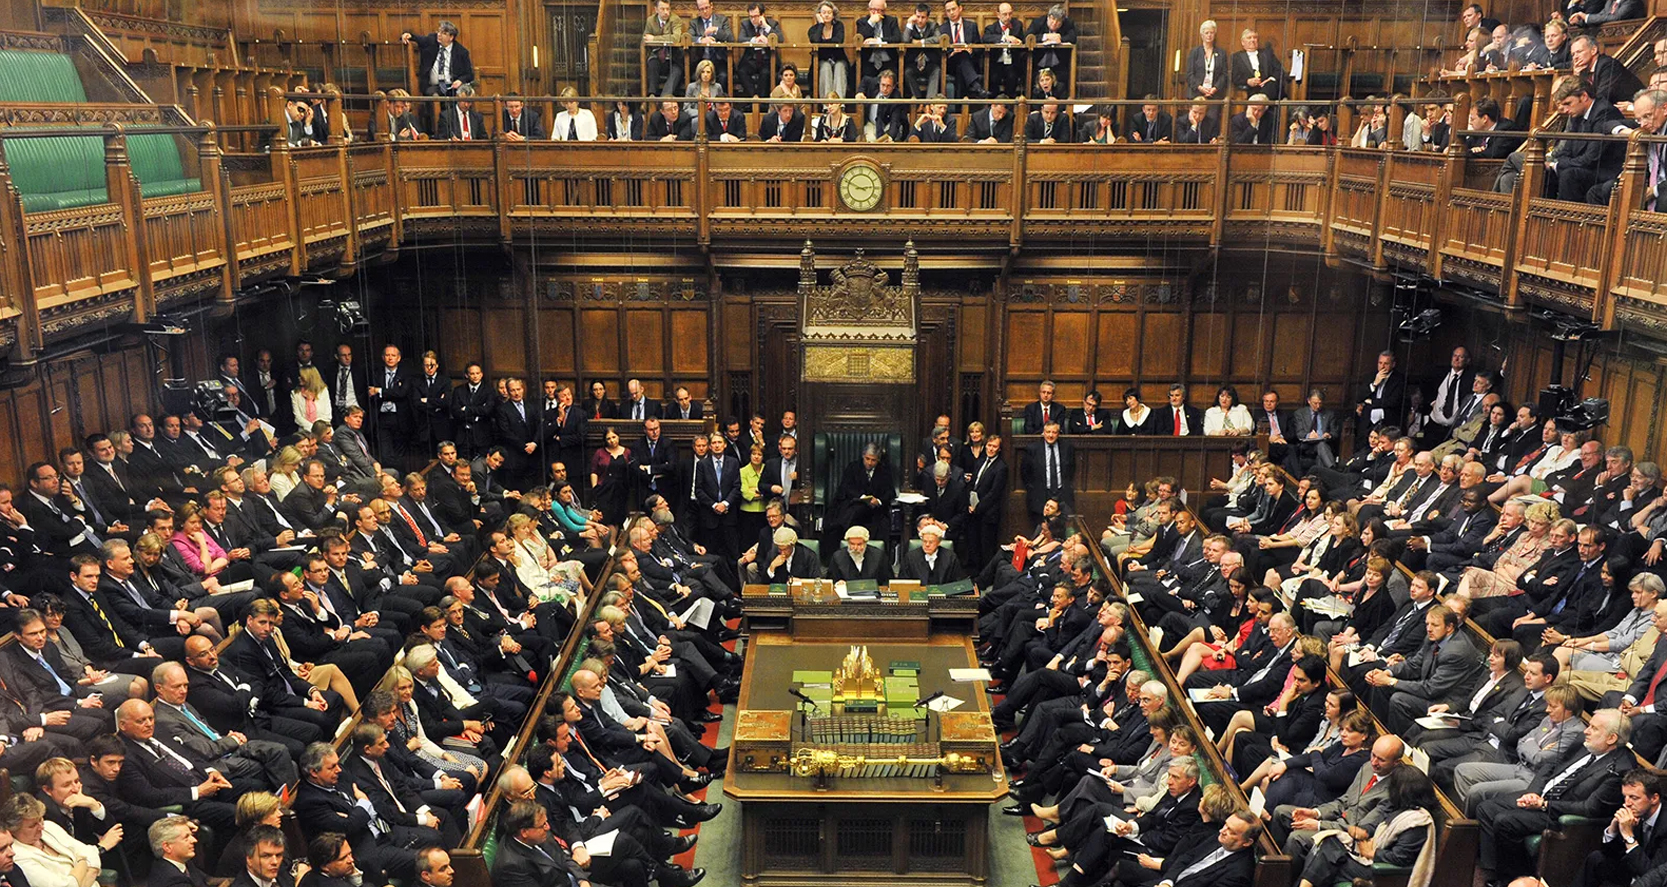 Photograph: Britannica/House of Commons